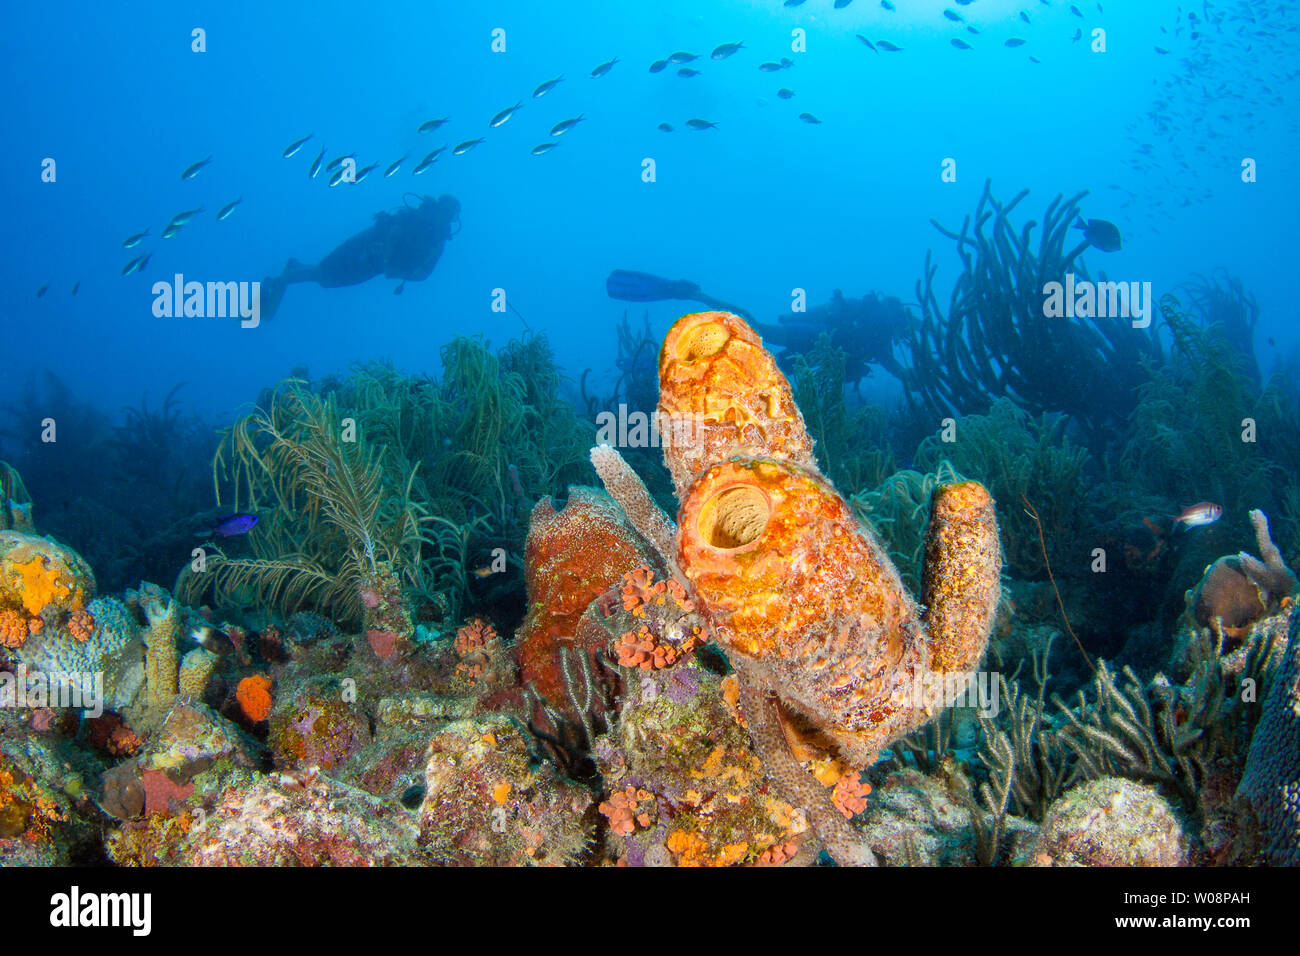 Divers (MR) swim through a reef scene with tube sponge on the Sea Aquarium House Reef off the island of Curacao in the Caribbean. Stock Photo